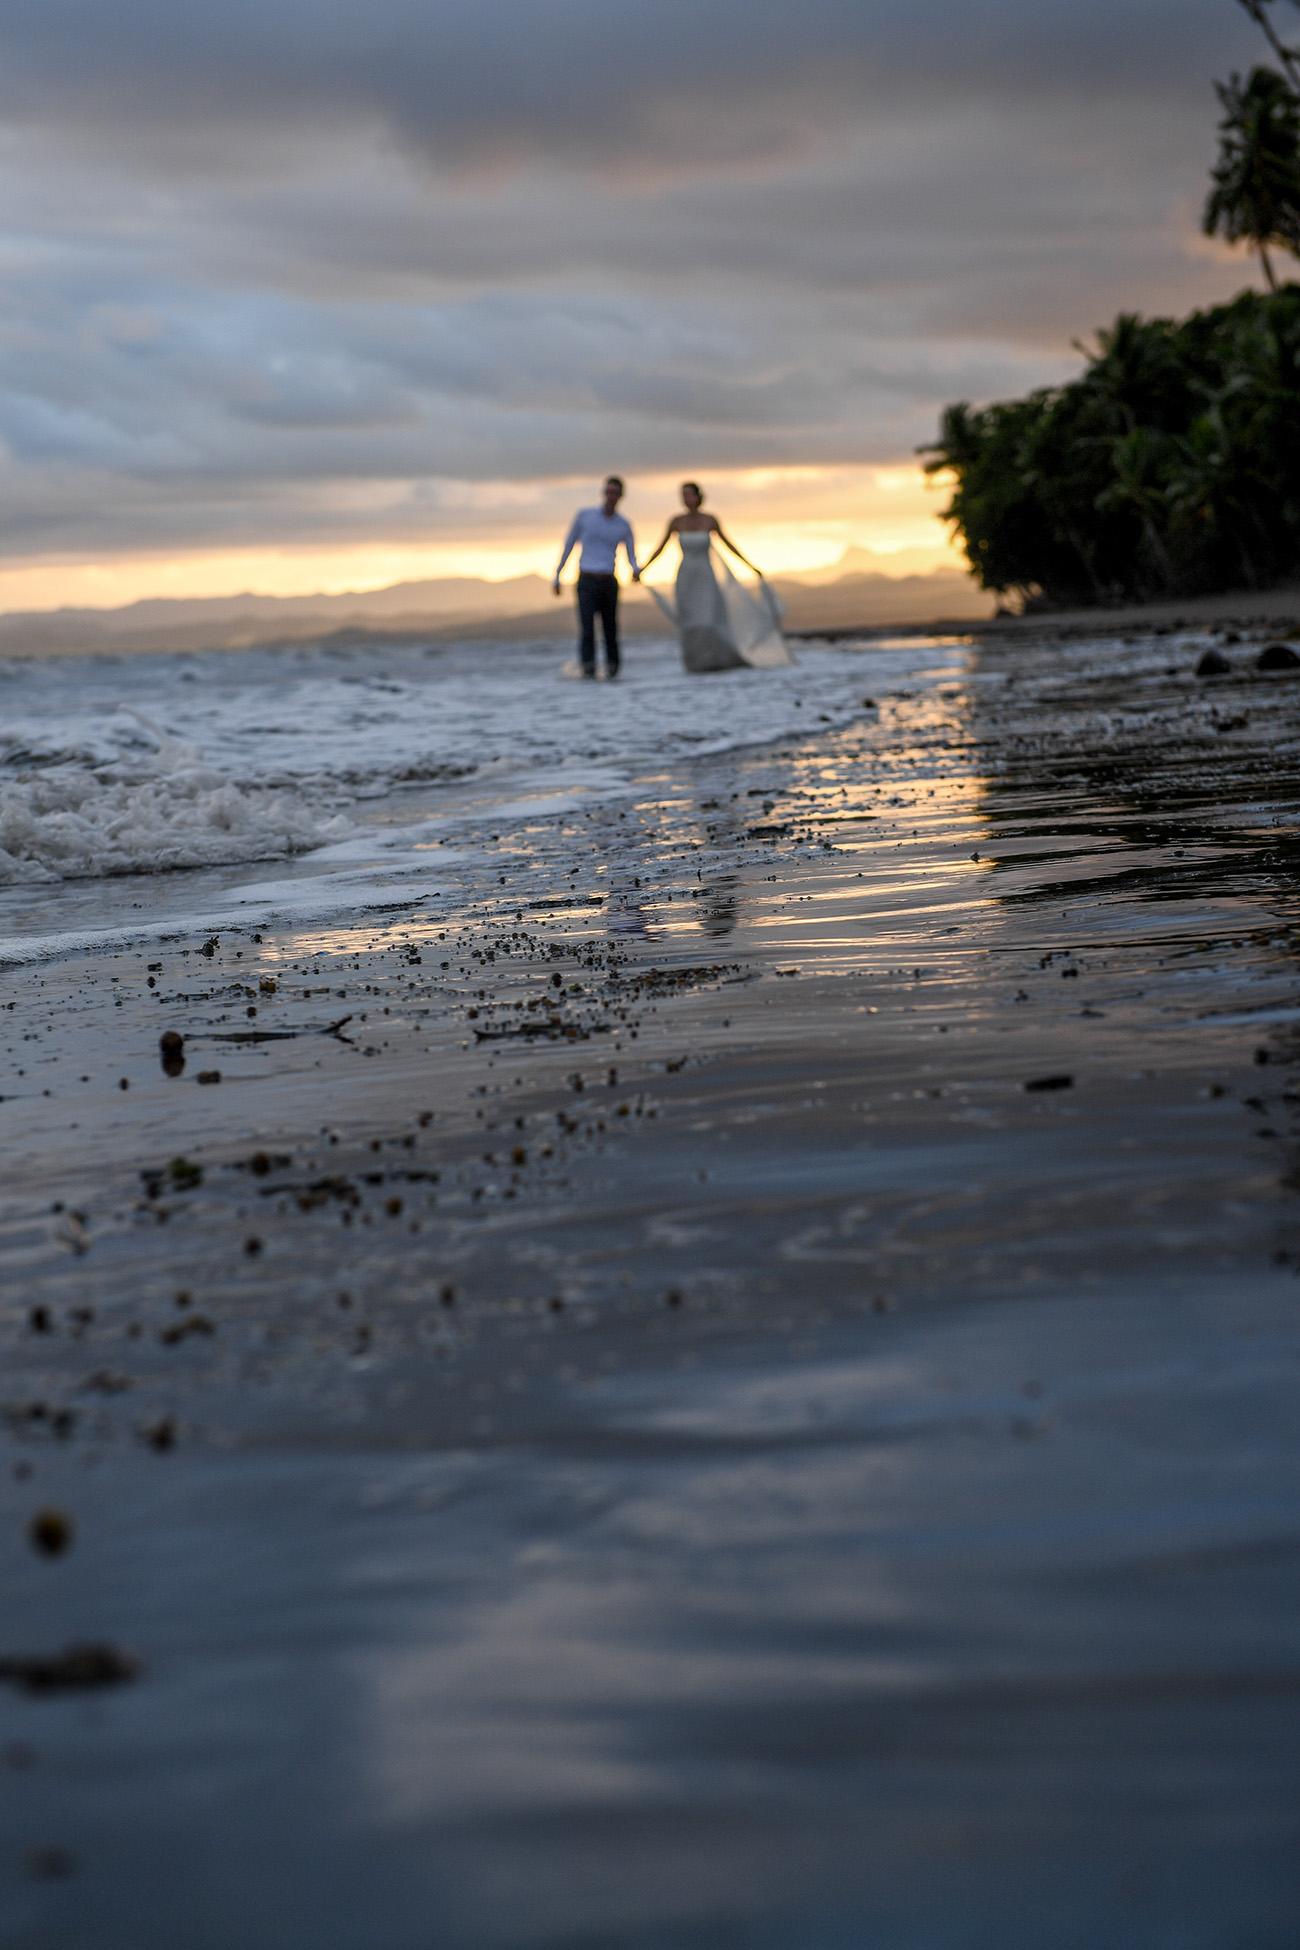 Stunning shot of bride and groom walking on the sea in Fiji sunset